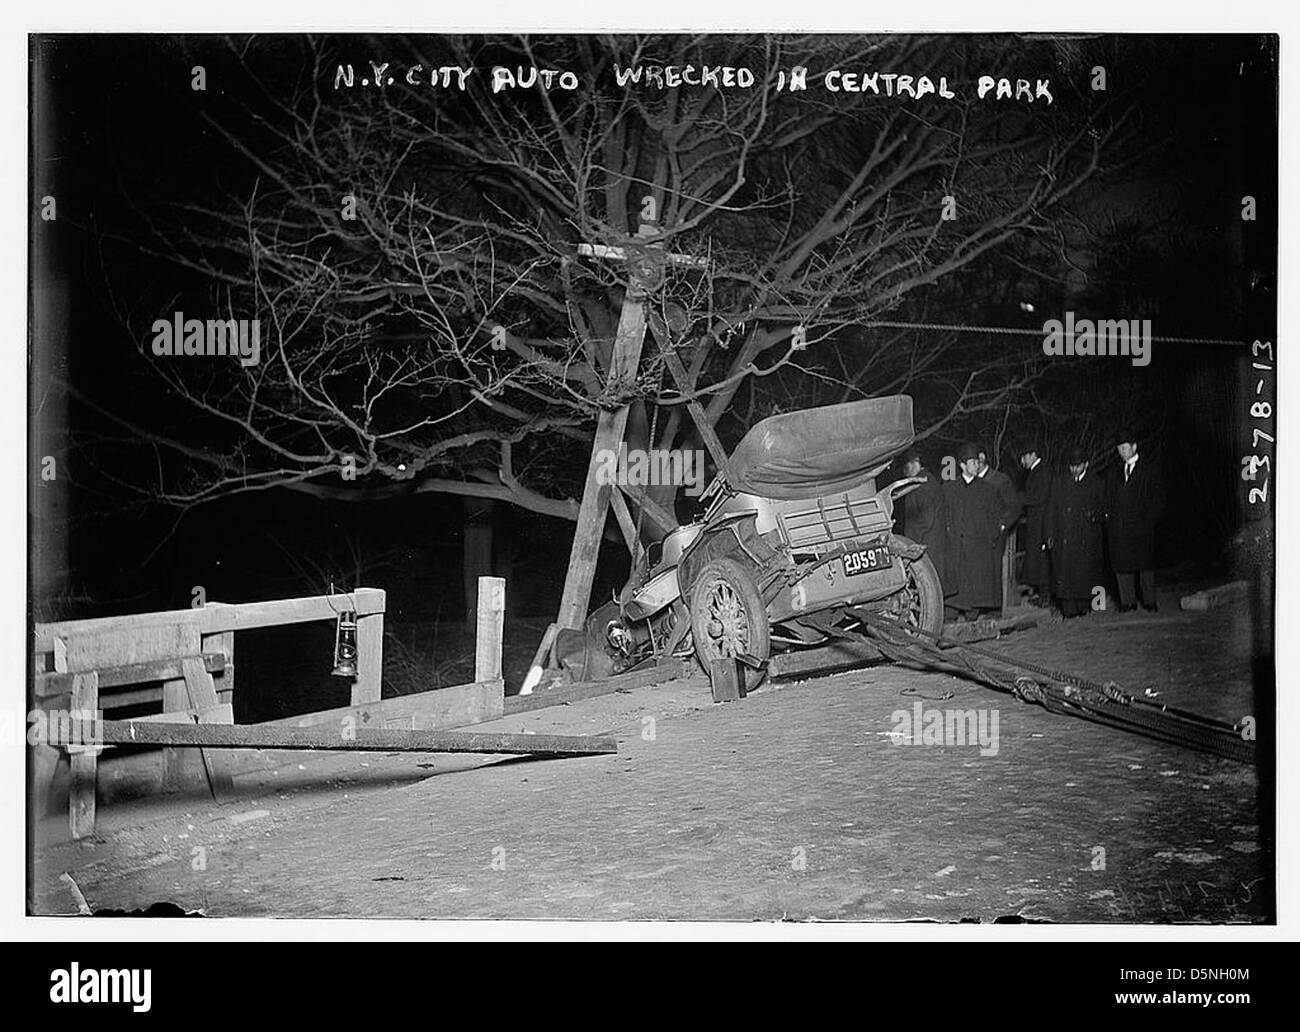 N.Y.C. auto wrecked in Central Park (LOC) Stock Photo